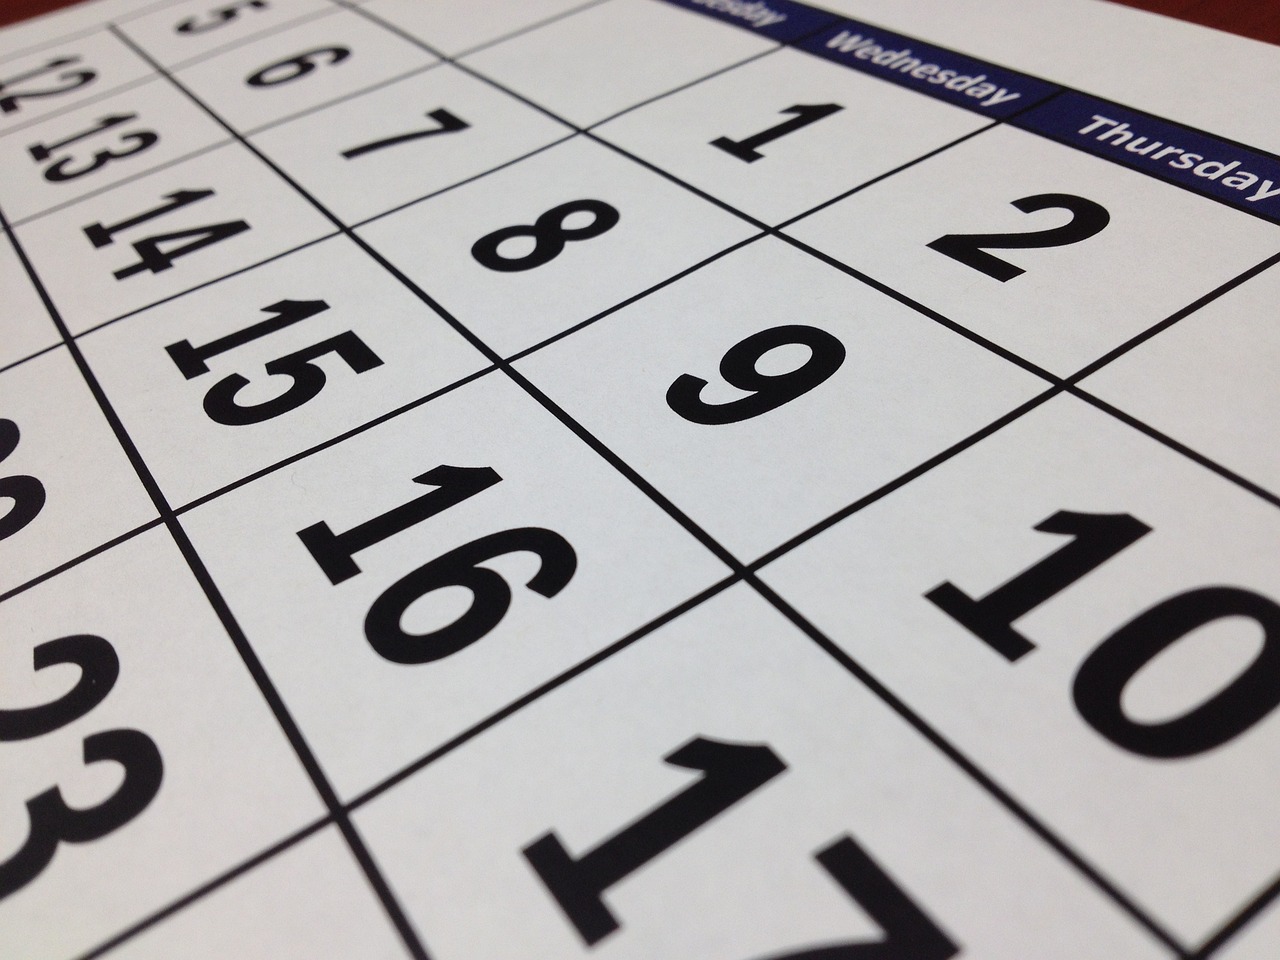 a close up of a calendar on a table, by Andrei Kolkoutine, happening, ready to model, detailed grid as background, very consistent, photo taken in 2018